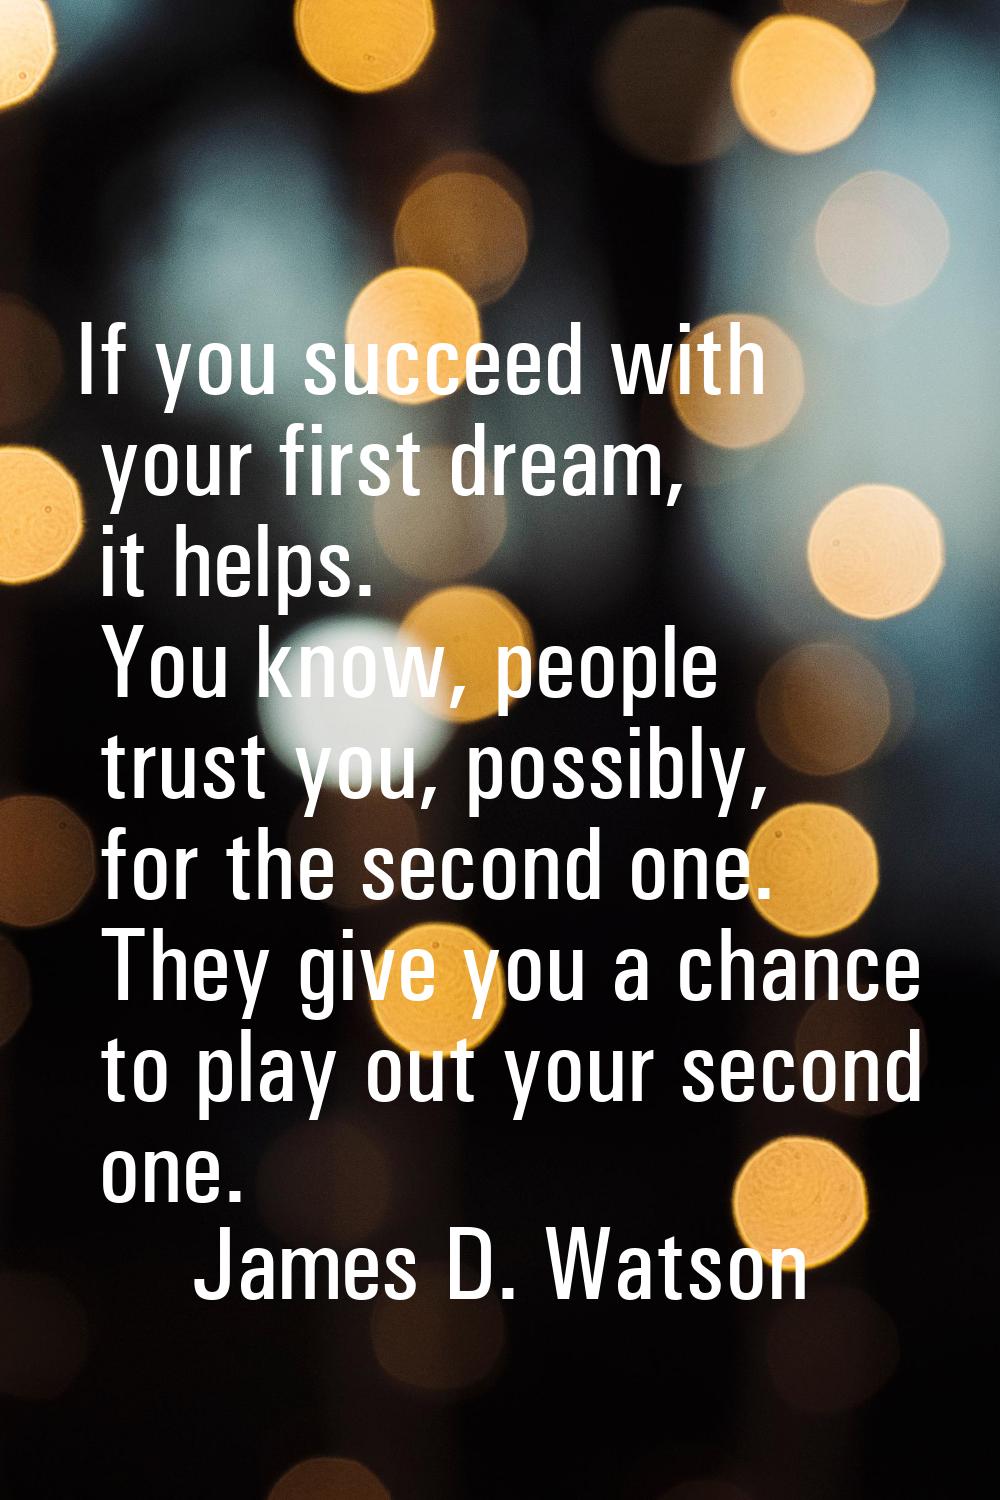 If you succeed with your first dream, it helps. You know, people trust you, possibly, for the secon